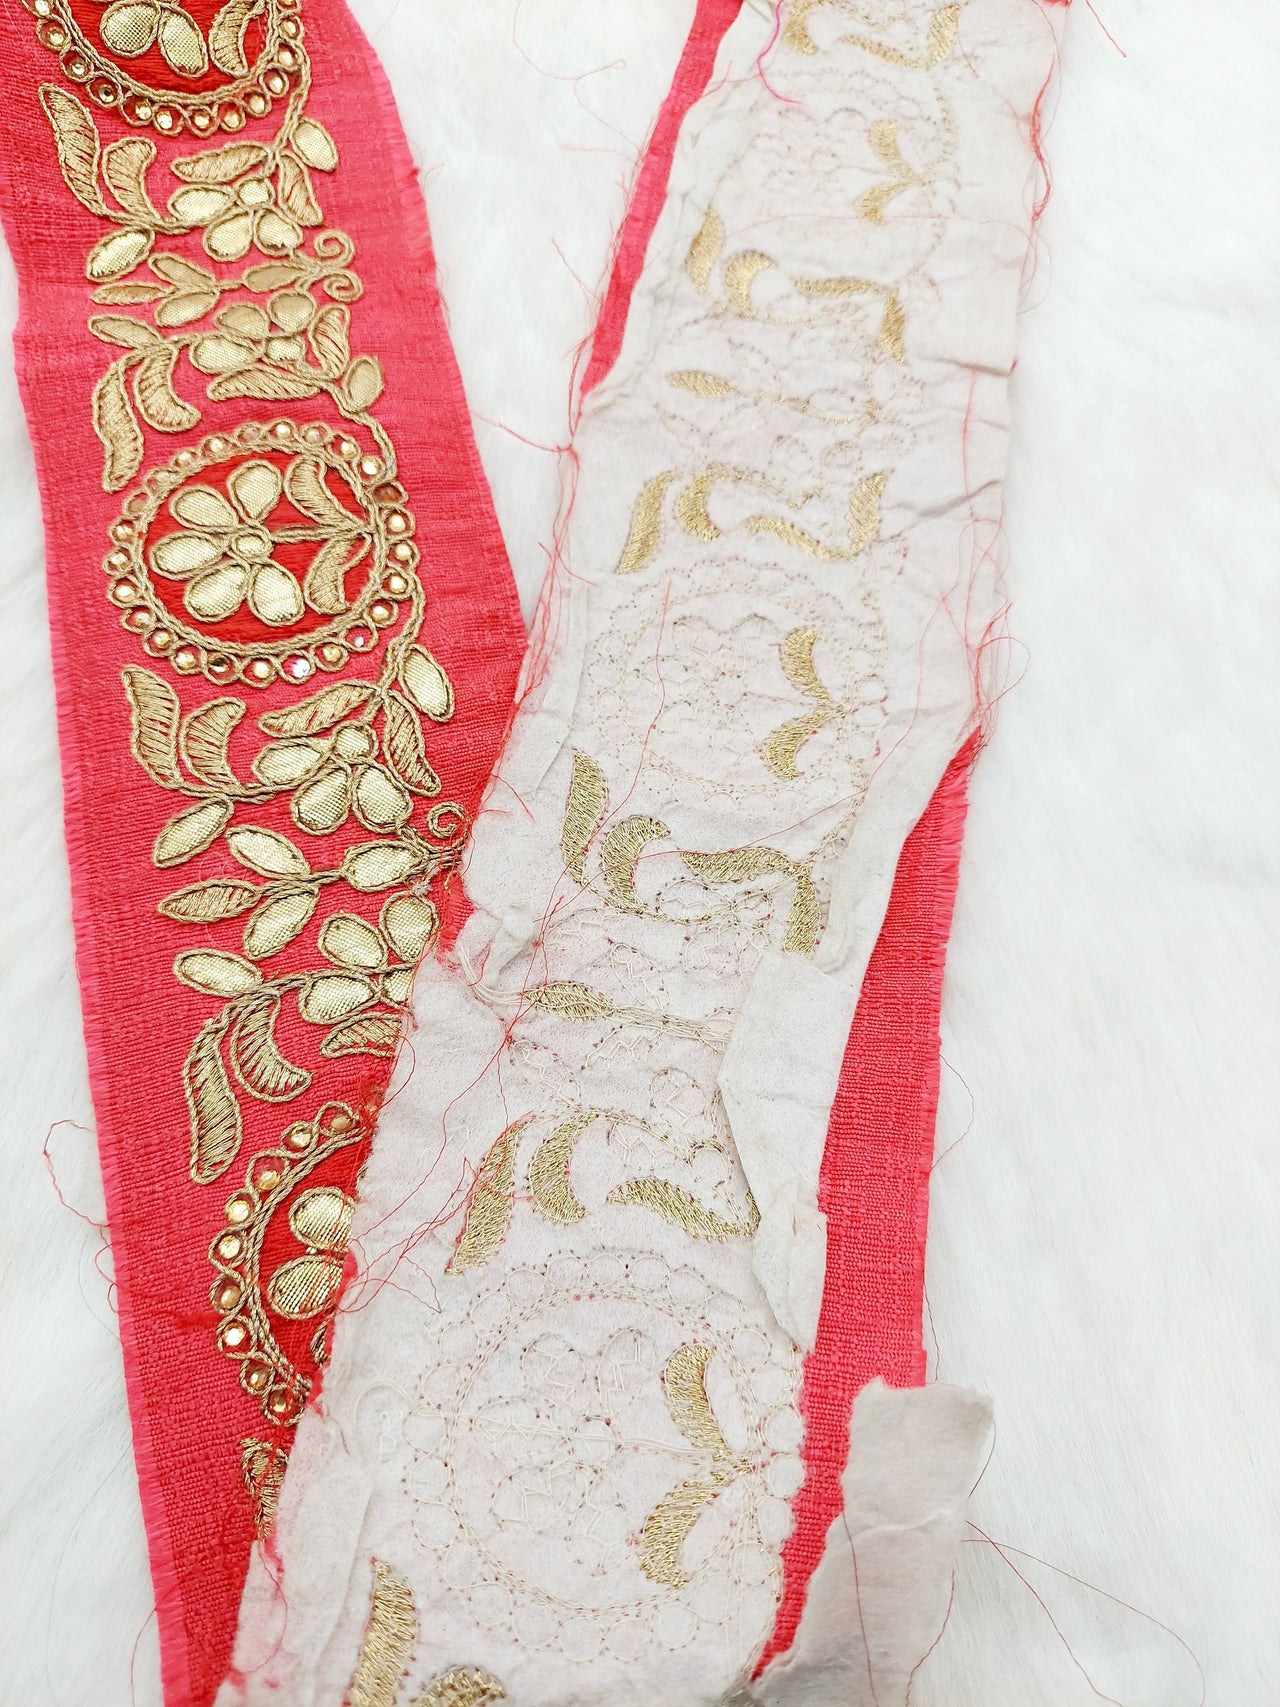 Red Art Silk Fabric Trim With Gold Zari Gota Patti Embroidery, Floral Embroider Trimming, Trim By The Yard